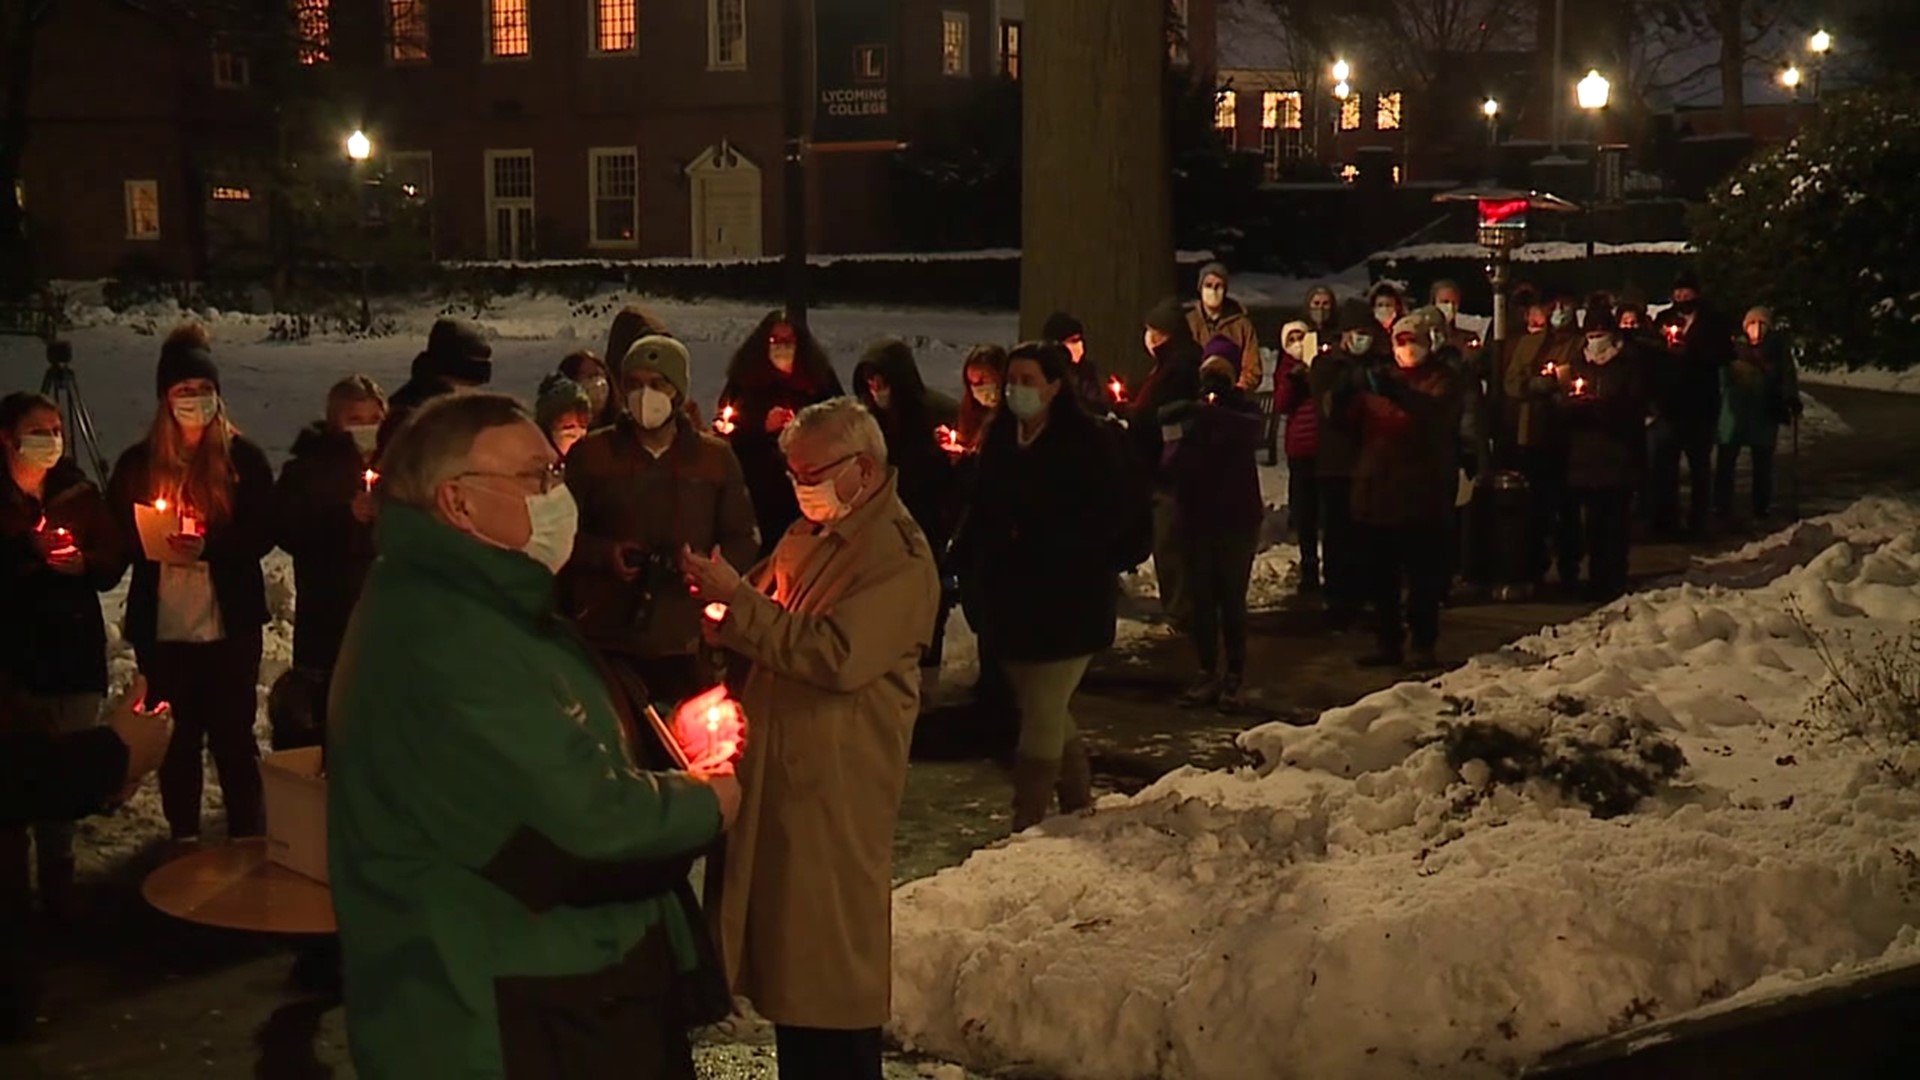 Dozens of people showed up to remember family and friends lost to COVID-19 and to honor healthcare workers working on the frontlines.